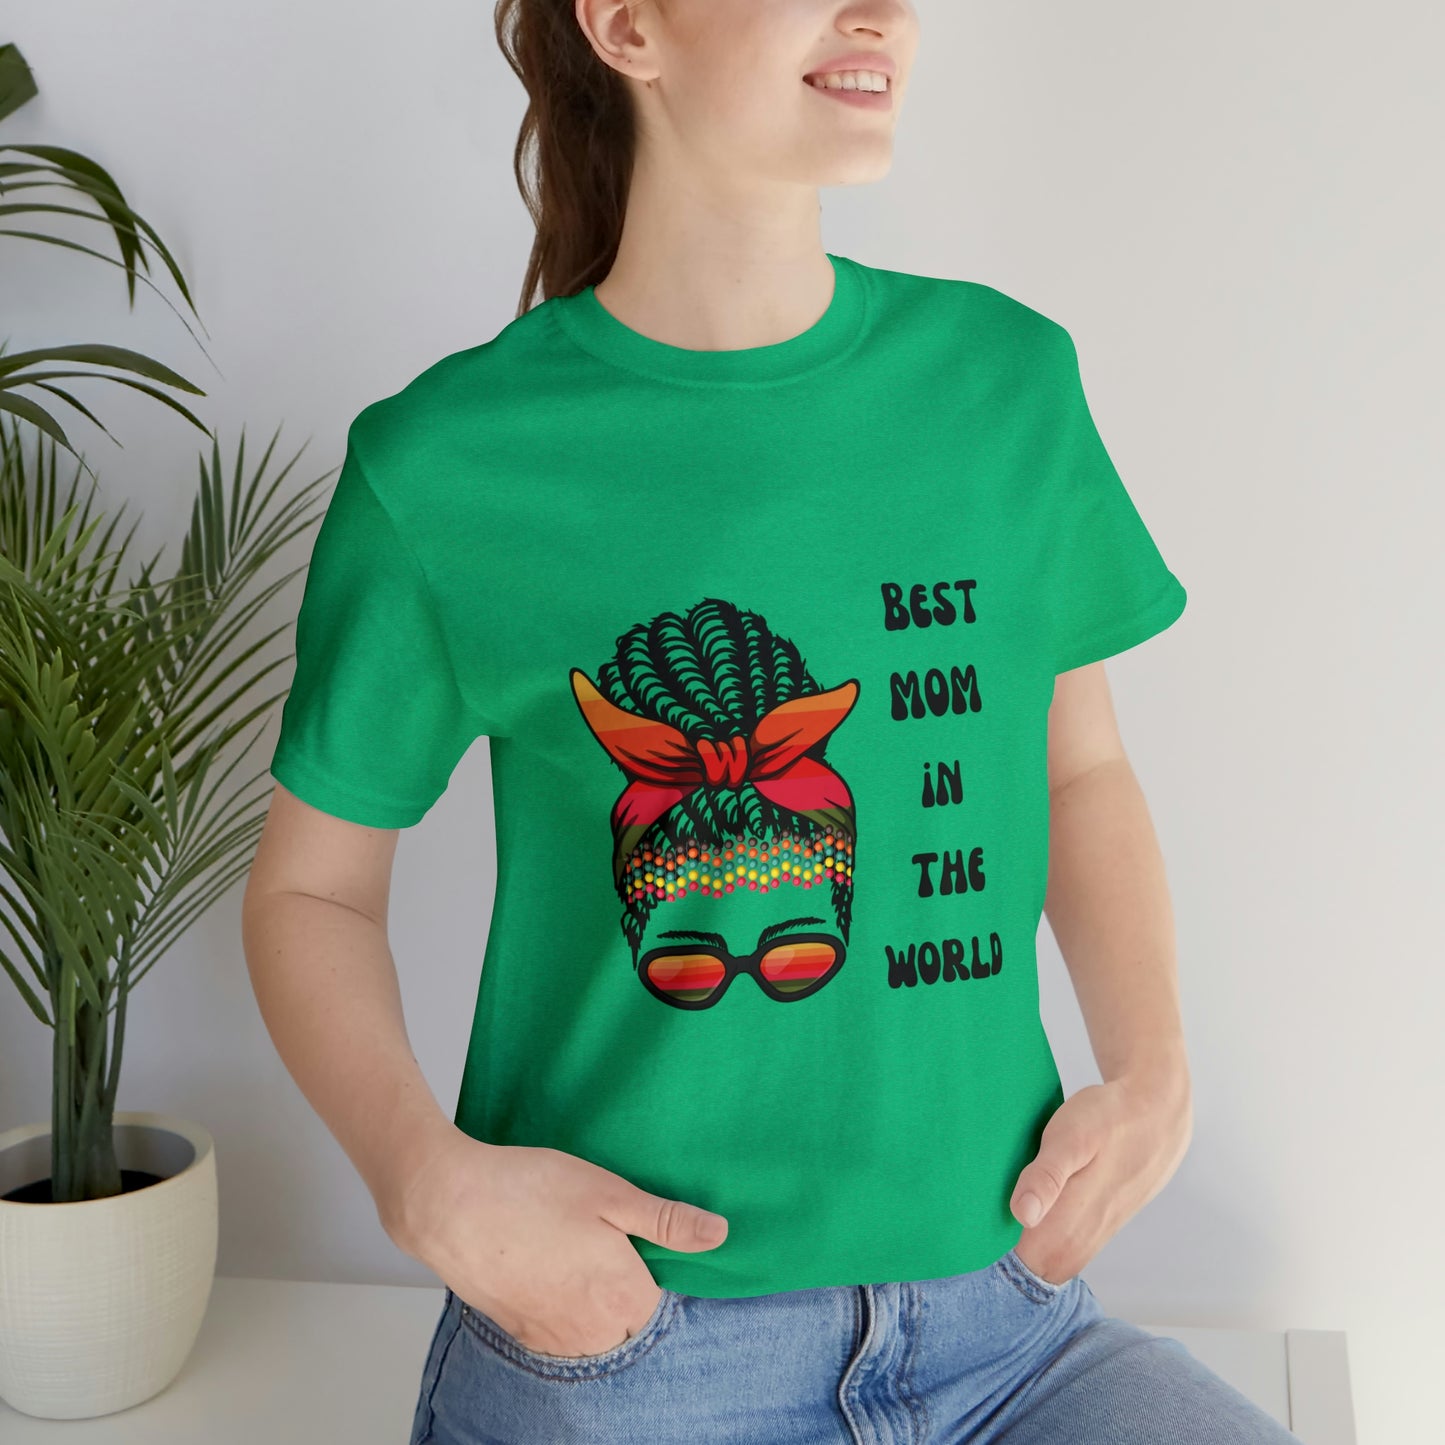 Best Mom In the World Tee